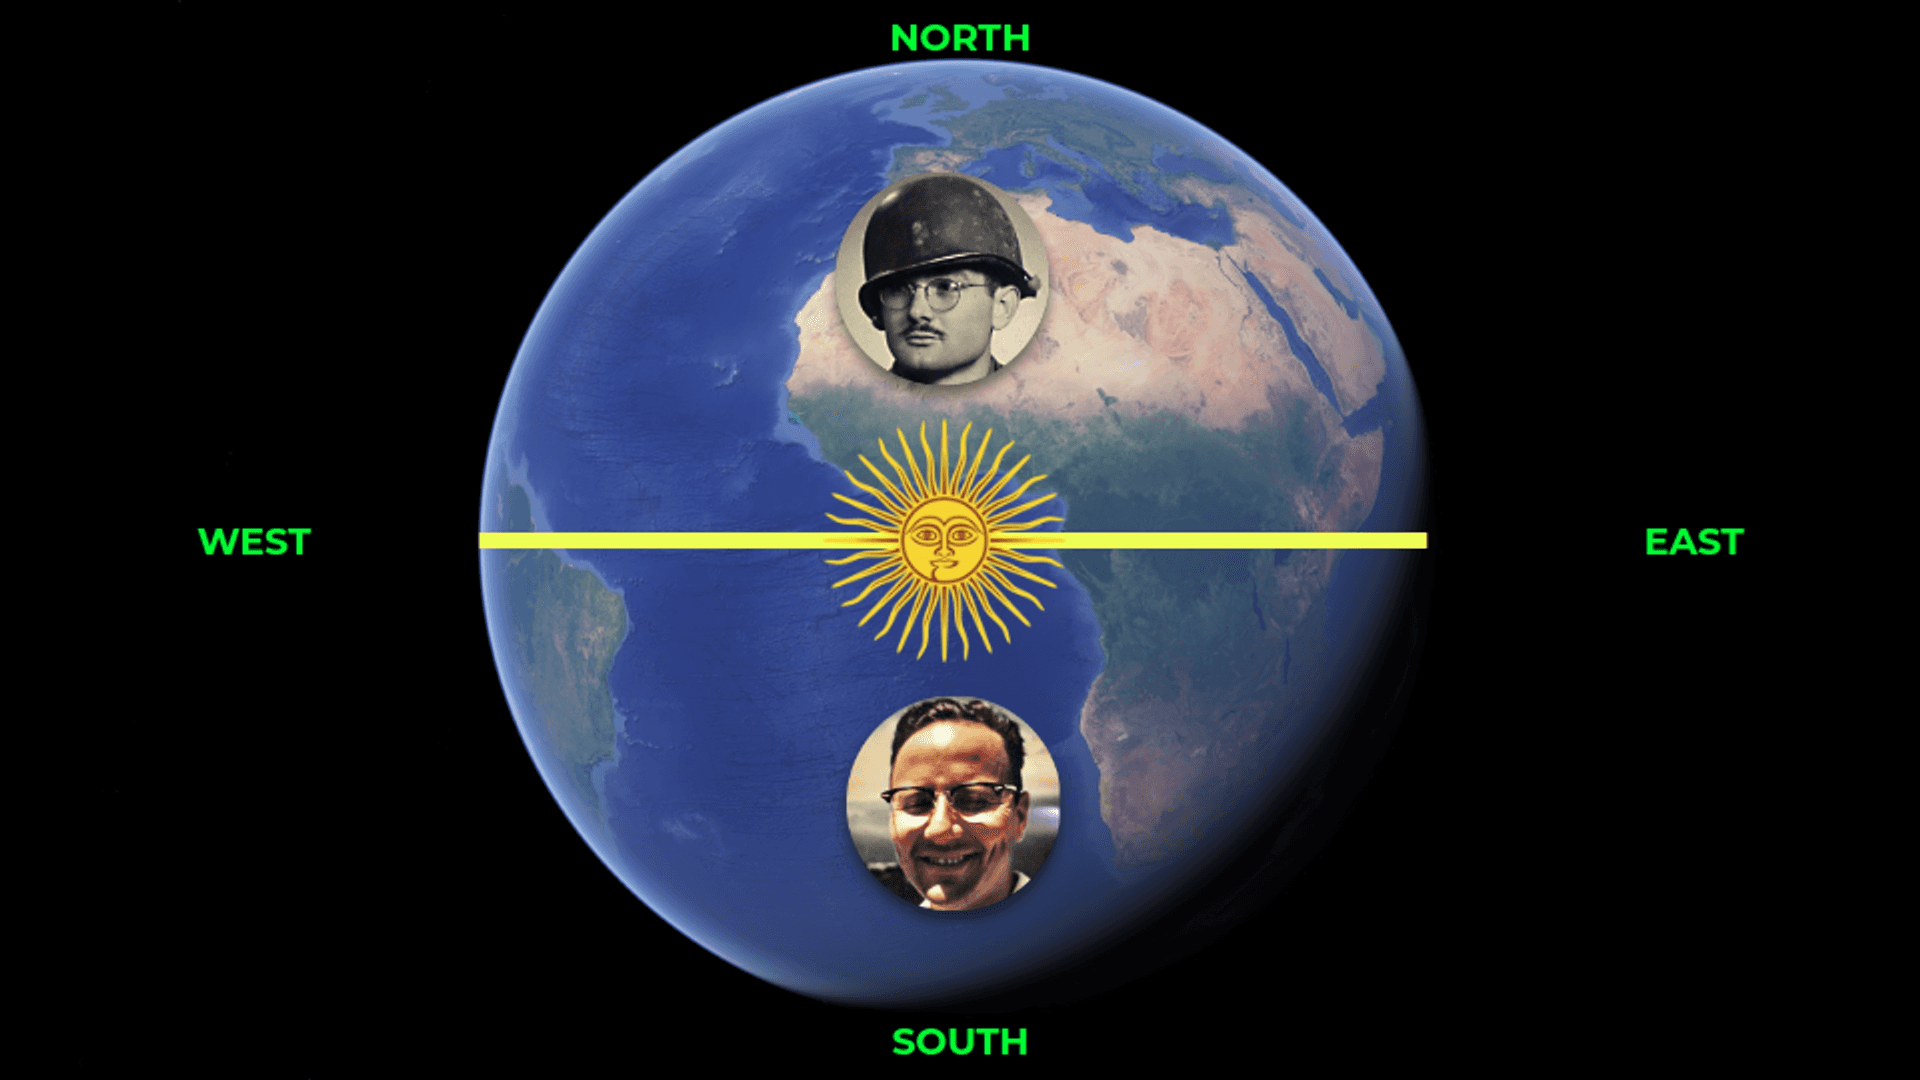 Two persons standing on Earth, one in the North, another in the South, and Sun at Noon between them